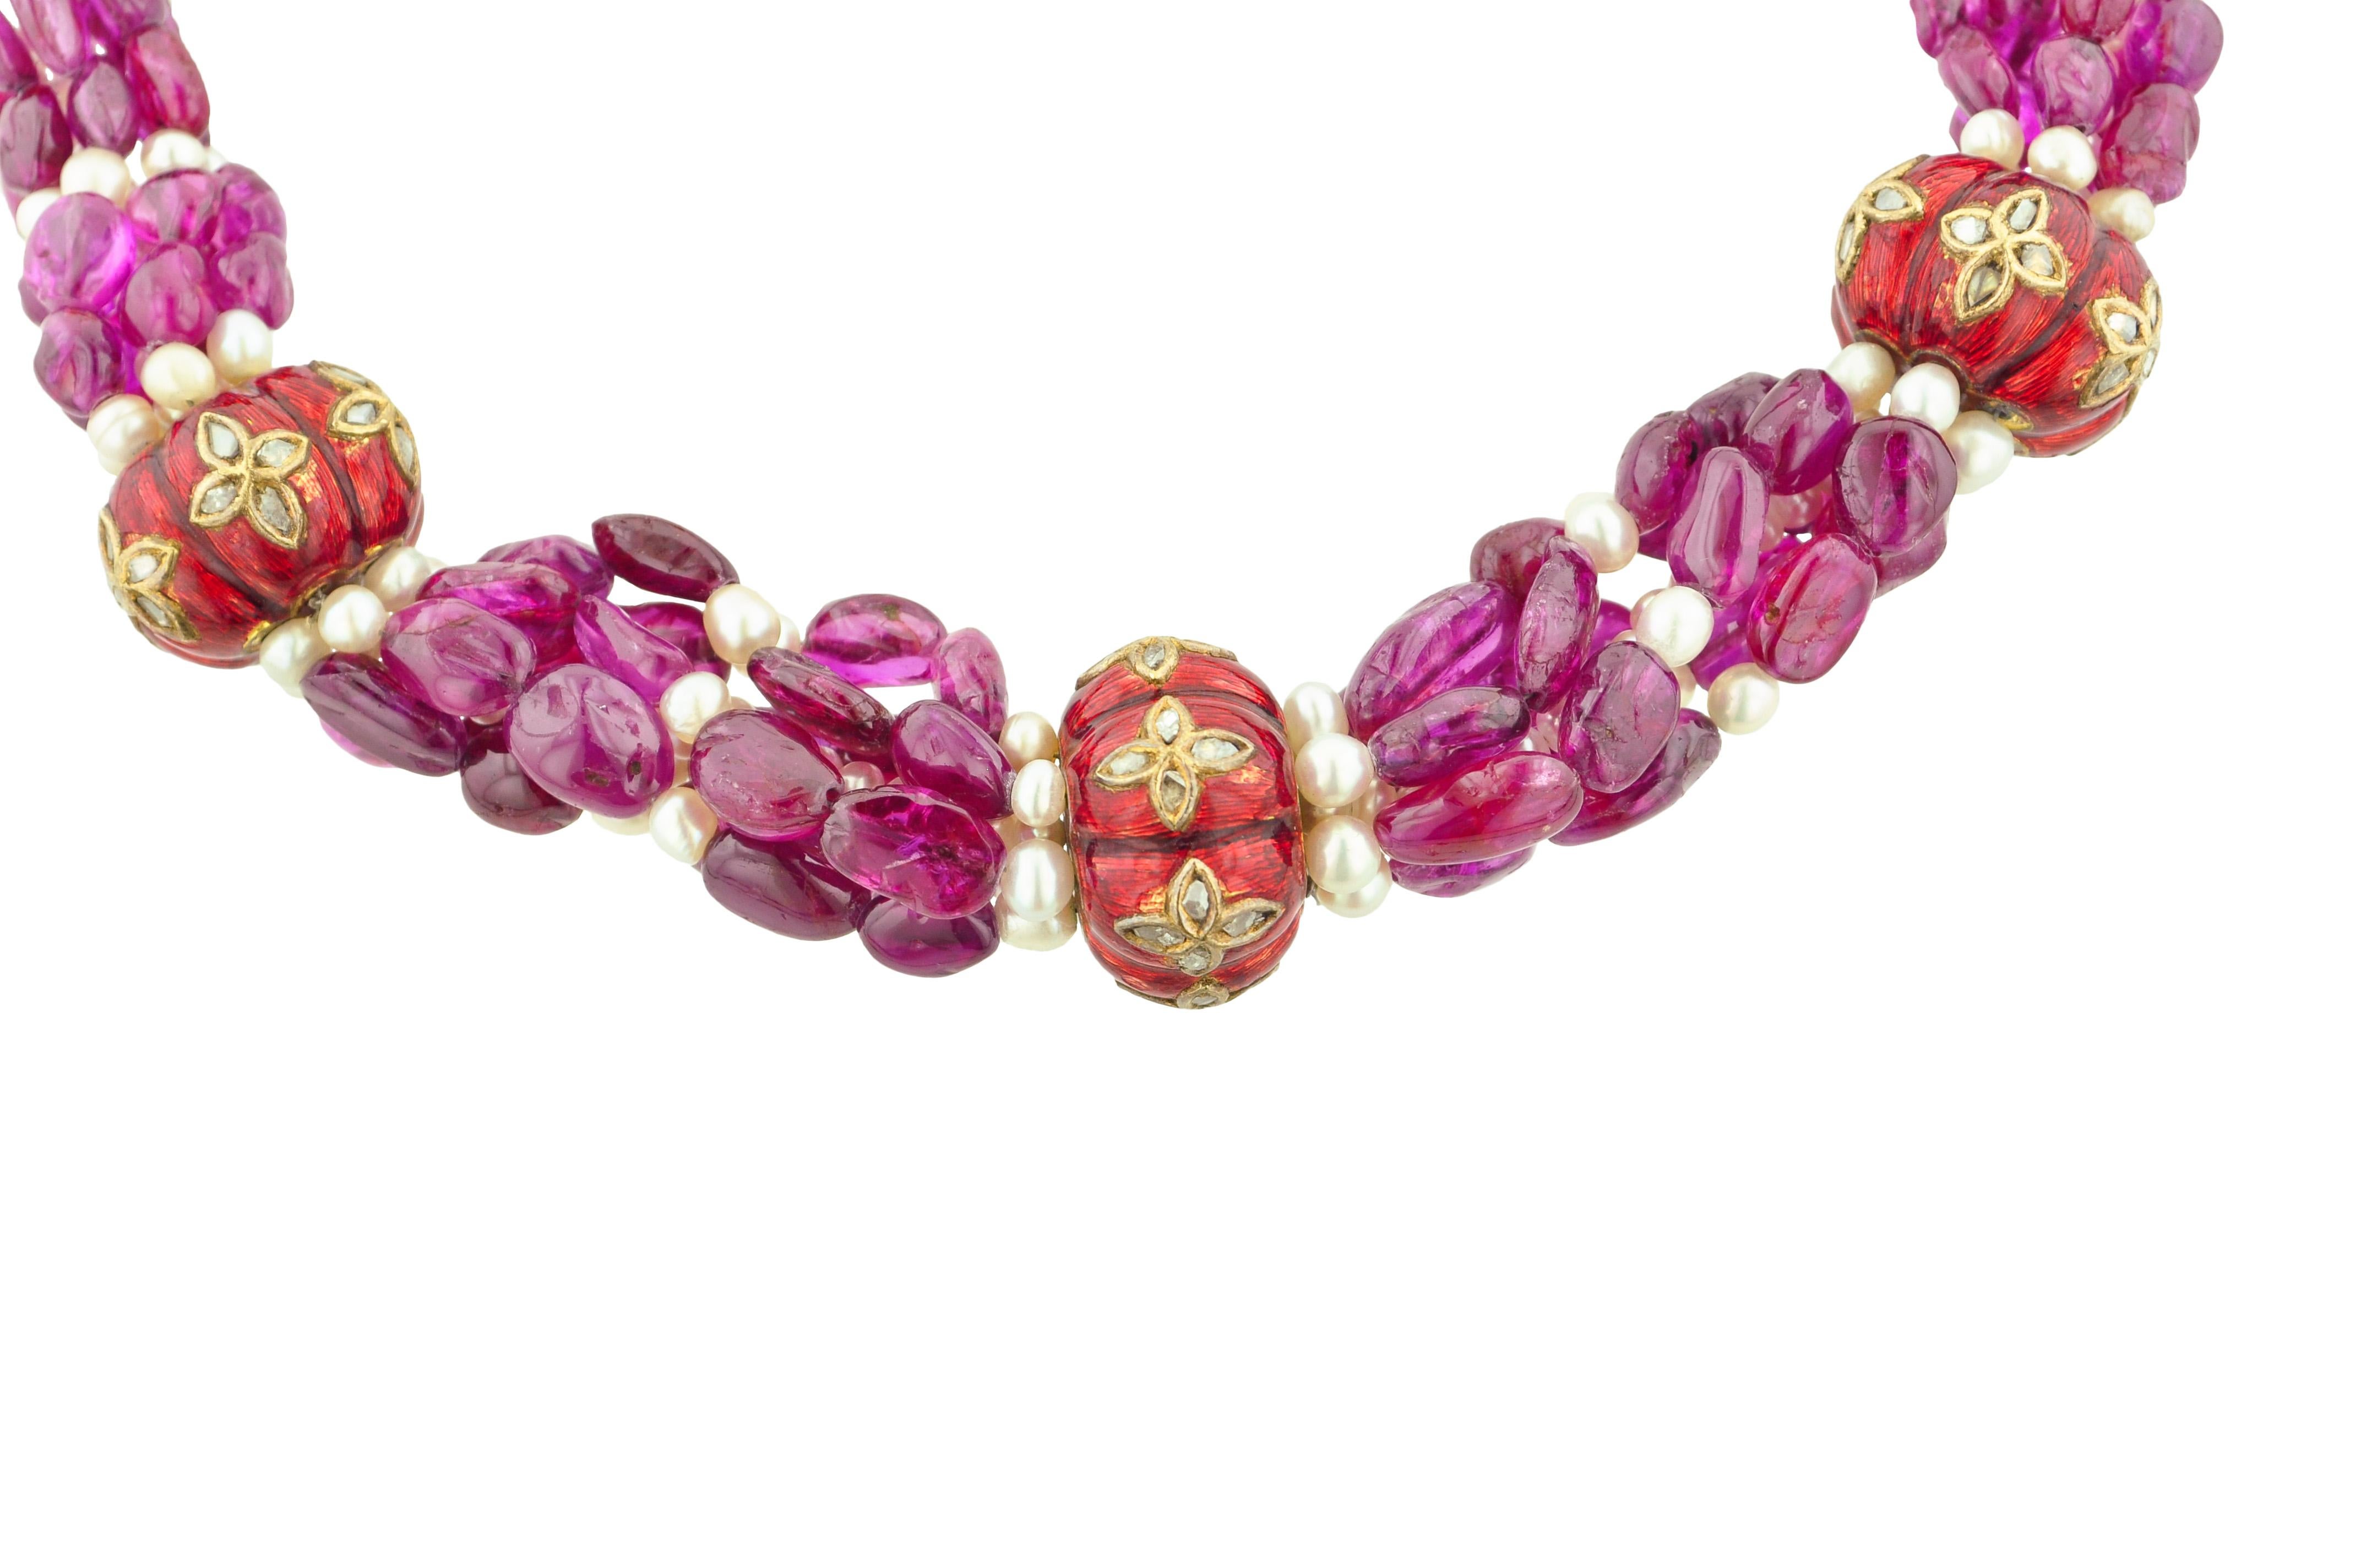 Indian style choker necklace featuring ruby beads, cultured pearl beads, and Indian beads composed of enamel and gold.

There are over 350.00 carats of rubies.

Length: 16 1/2 inches